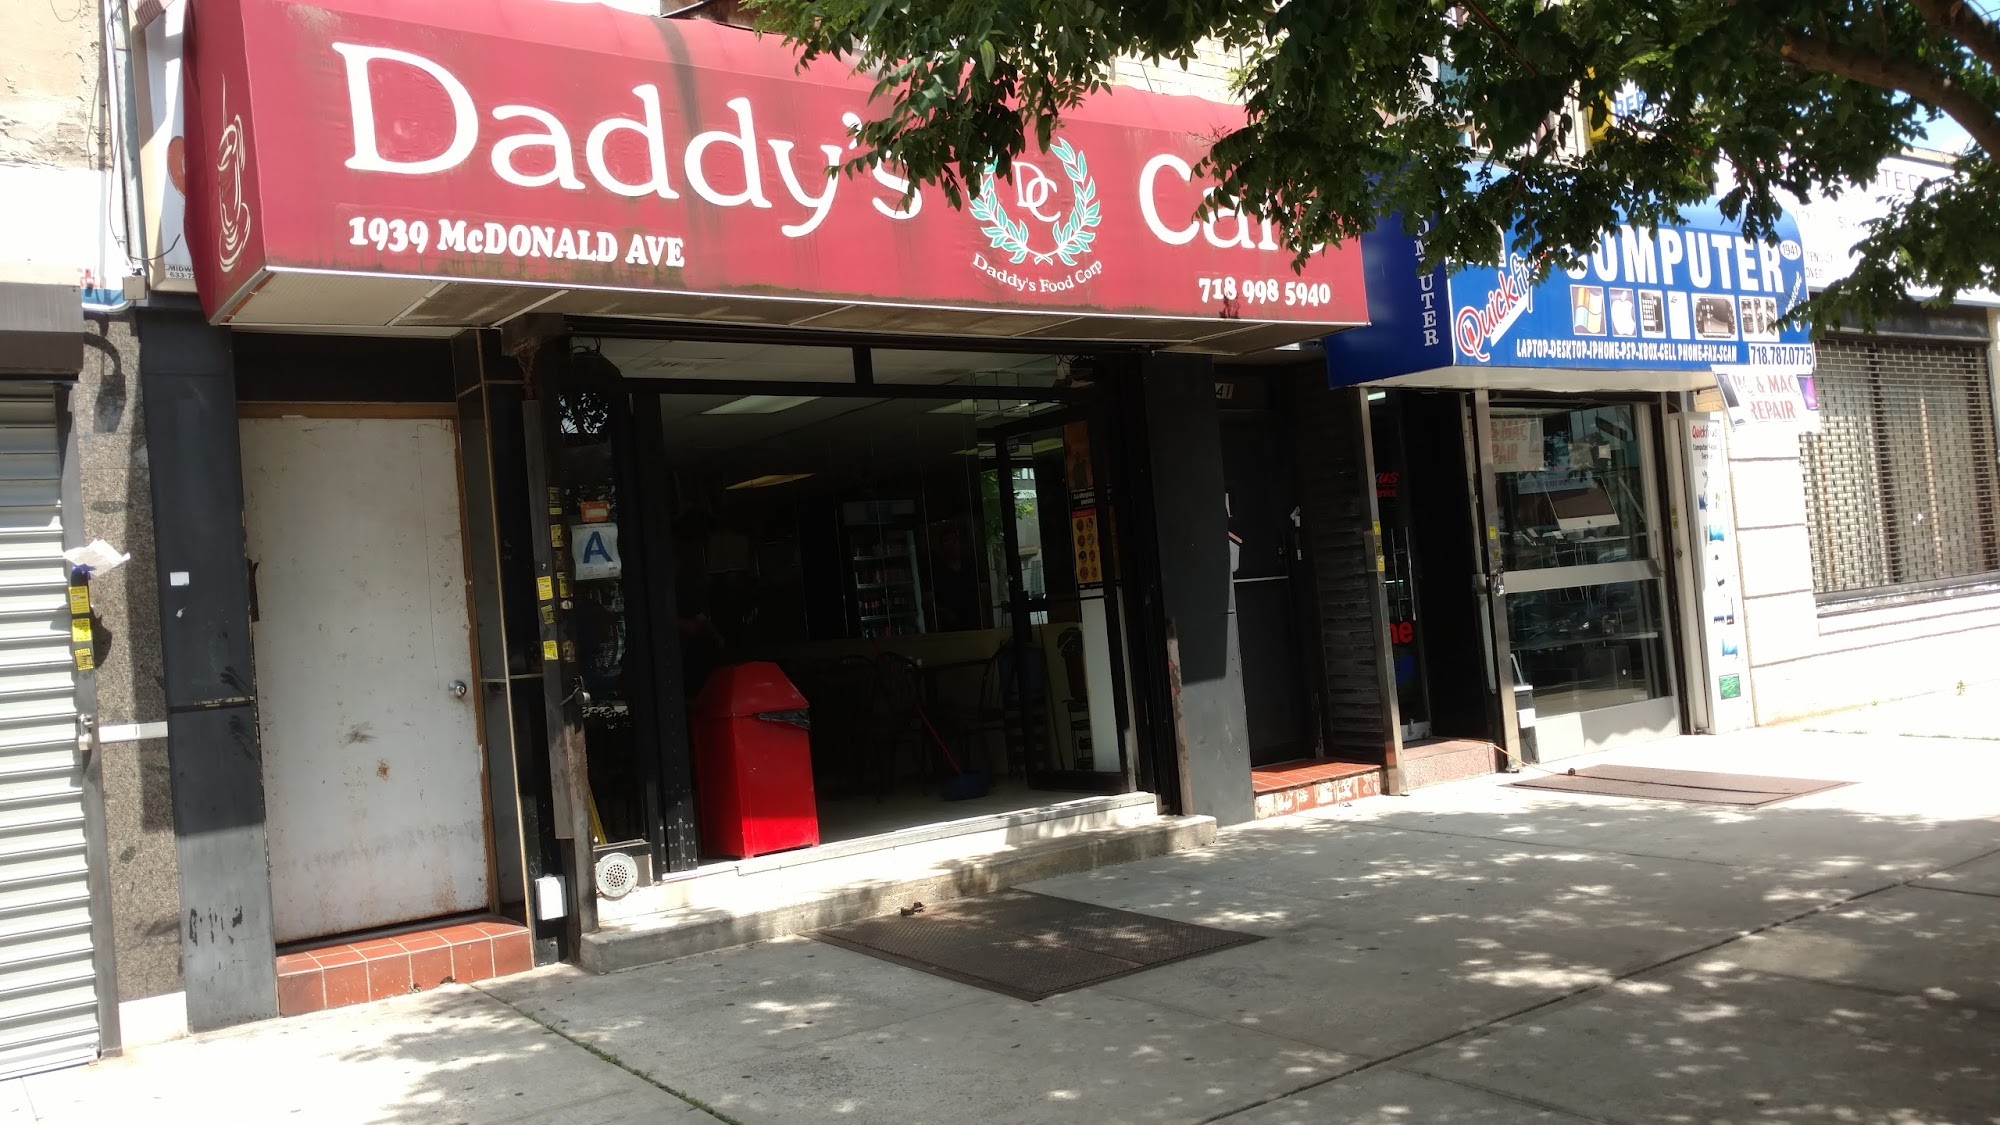 Daddy's Food Corporation